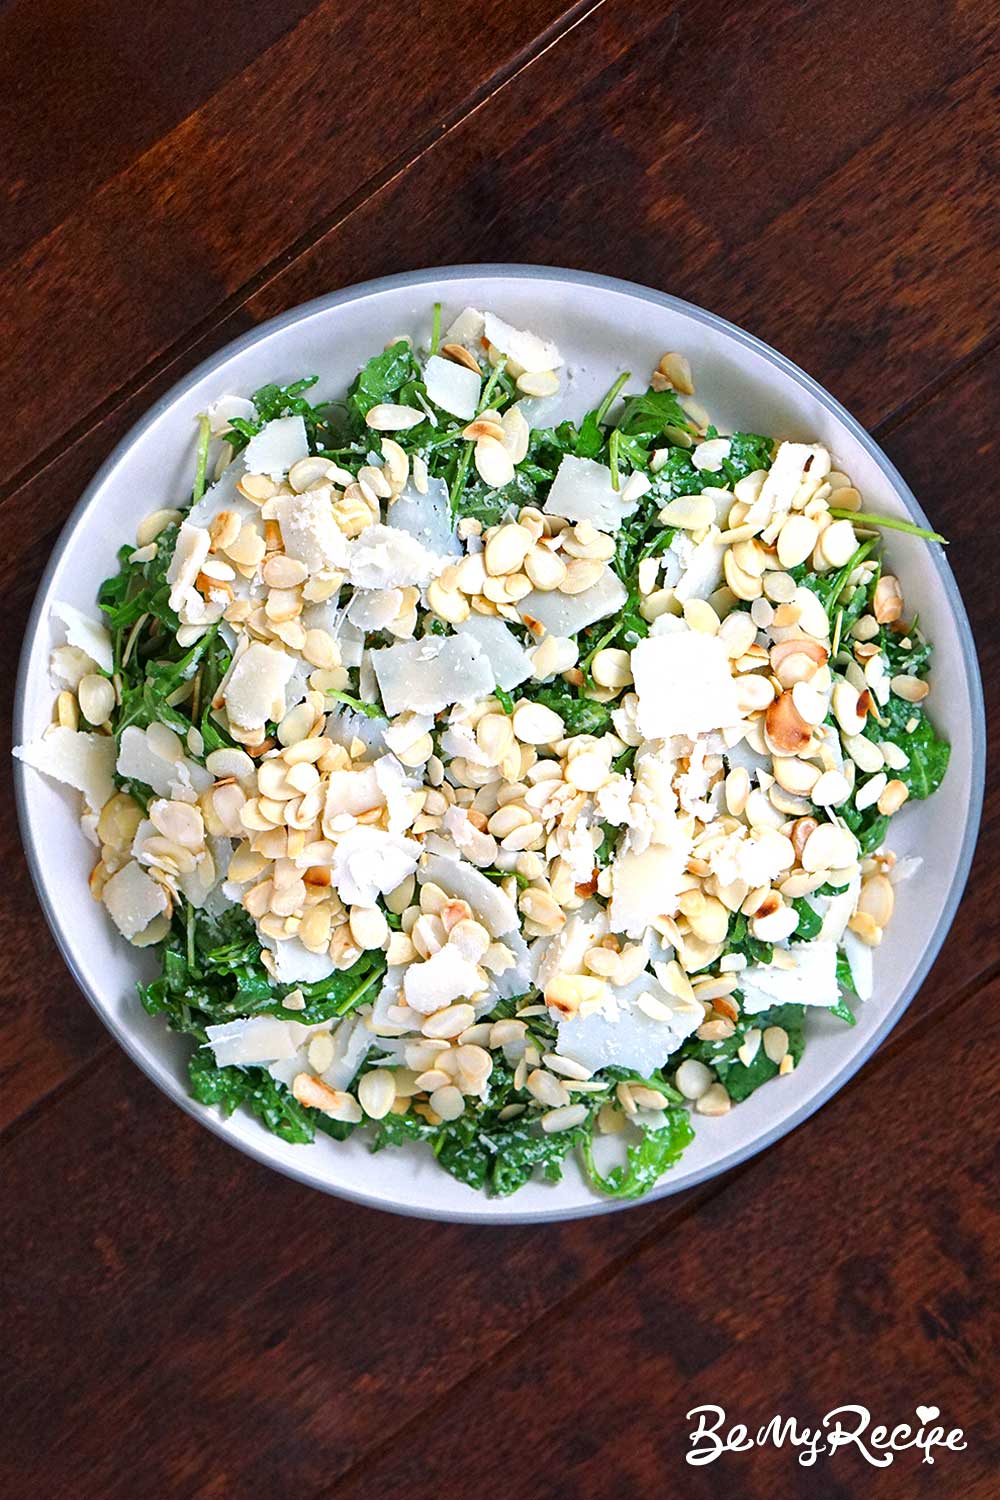 Try This Arugula Parmesan Salad if You Love Parmesan on Everything!